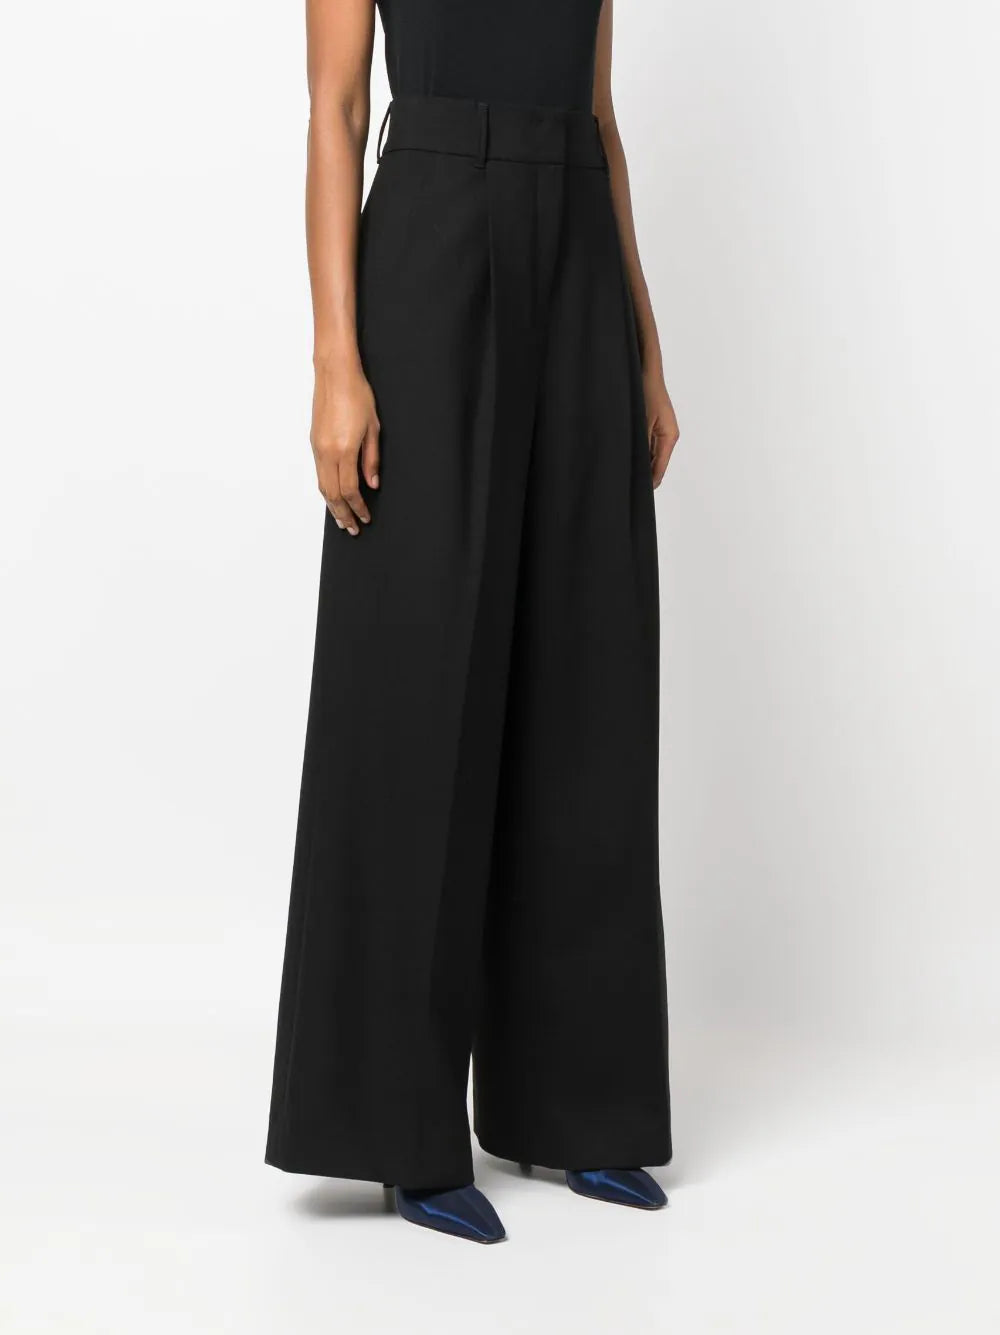 REFRESHING AMBITION high-waisted pants, pure black